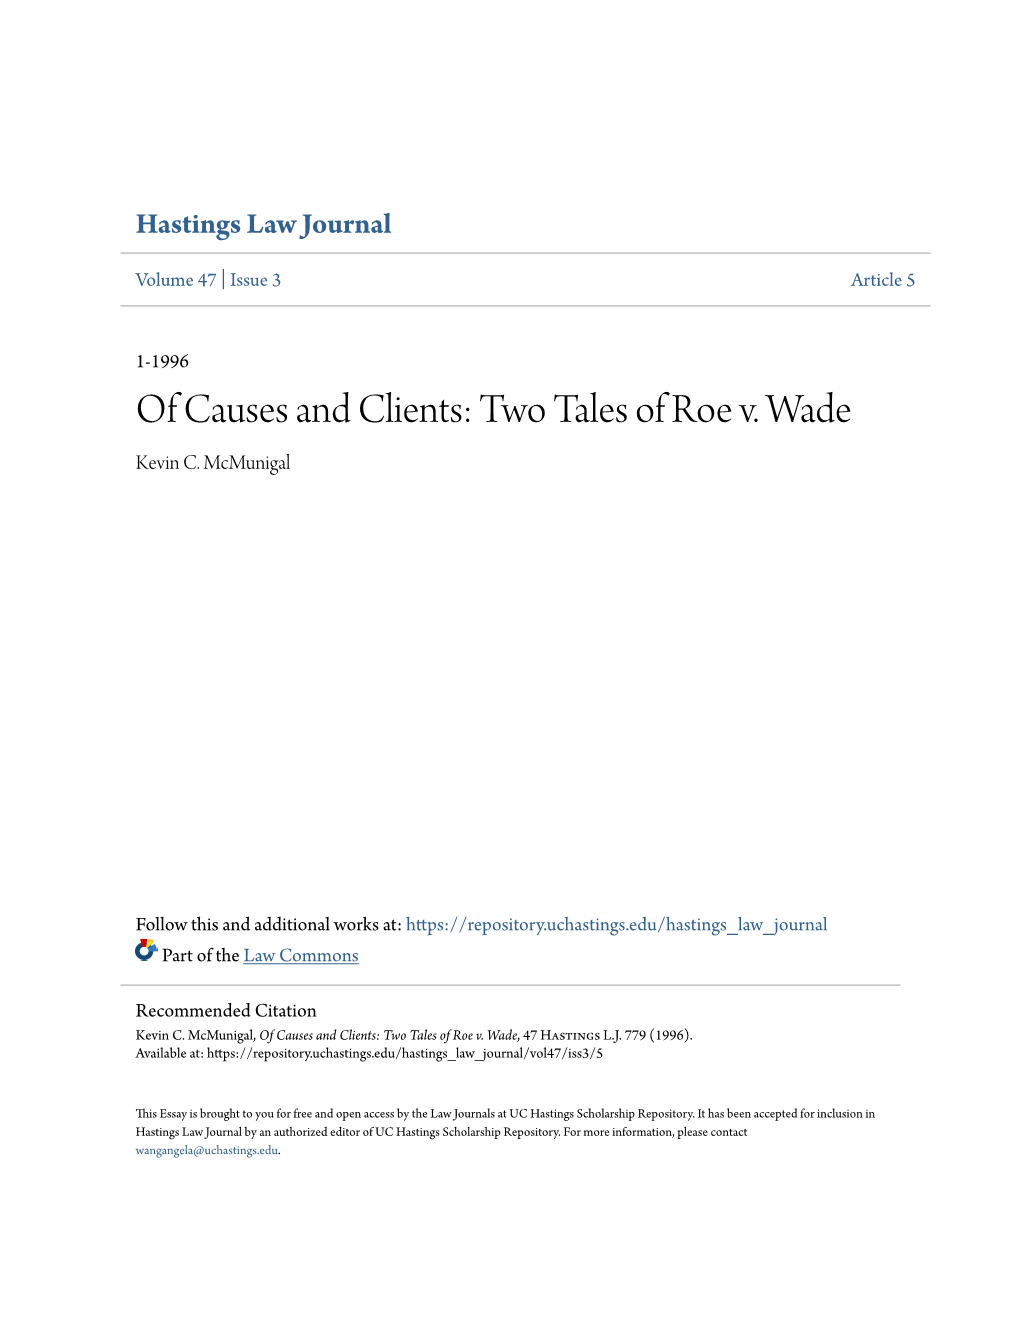 Of Causes and Clients: Two Tales of Roe V. Wade Kevin C